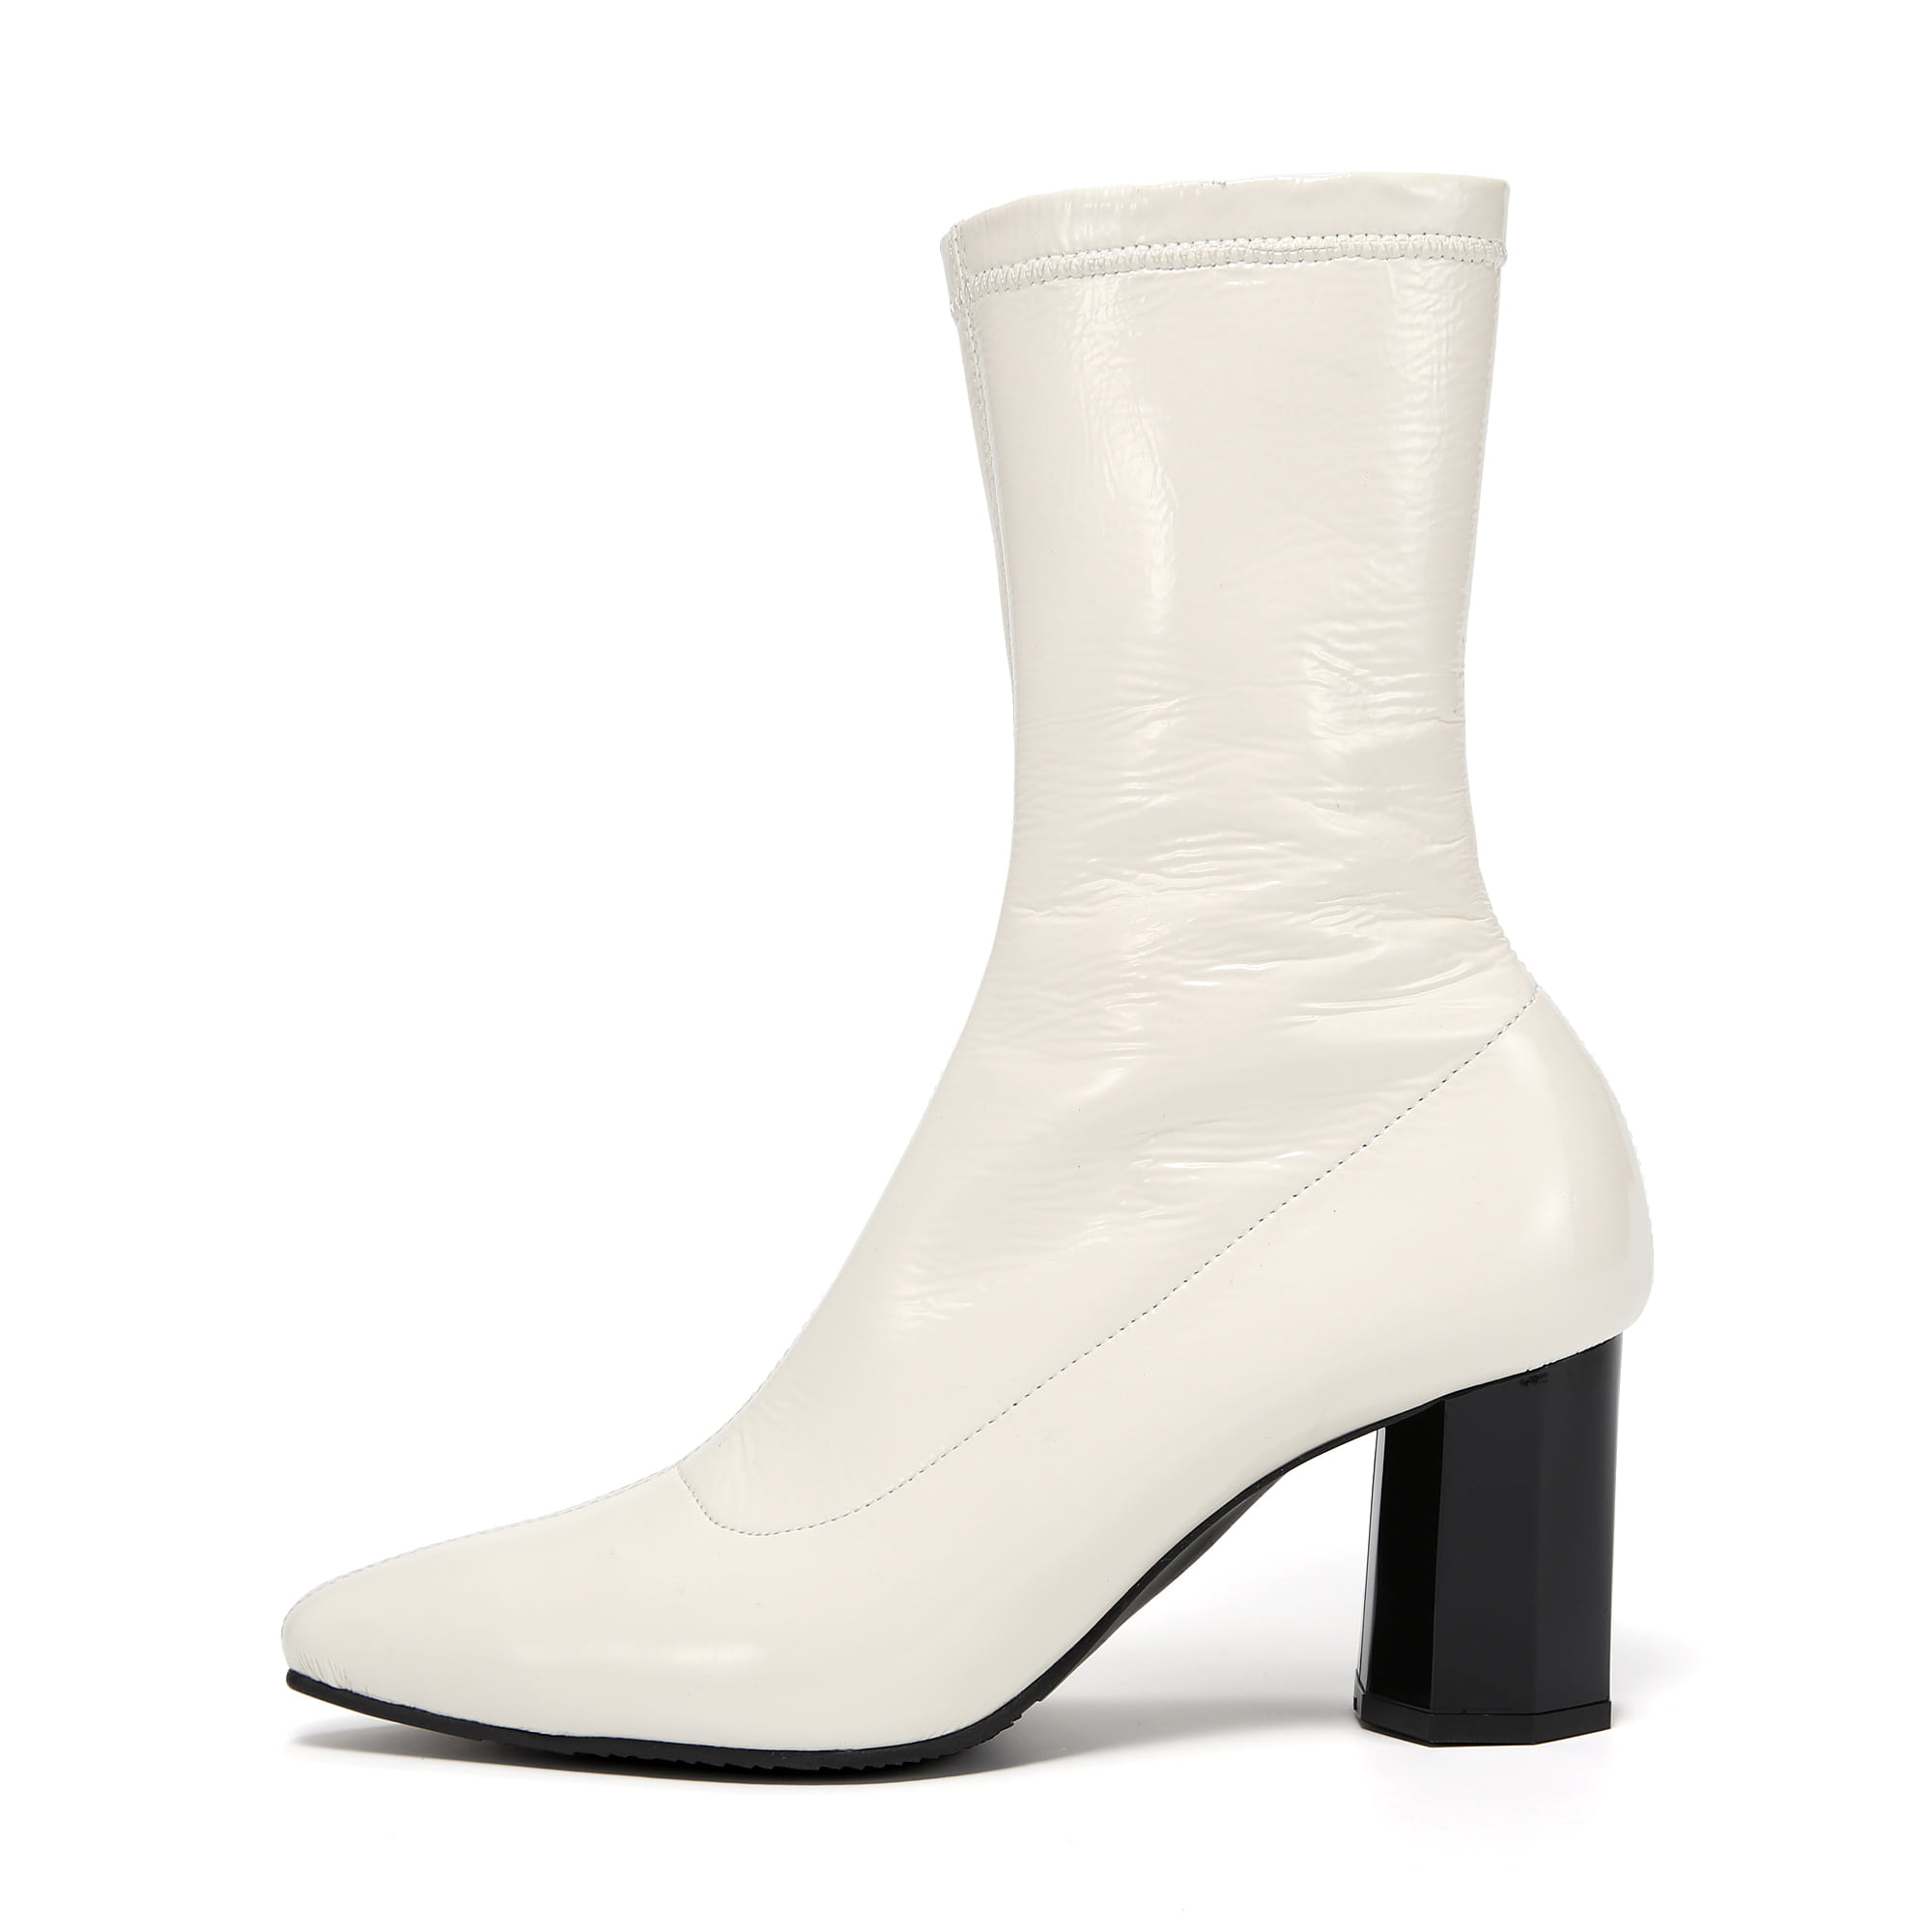 White glossy span boots